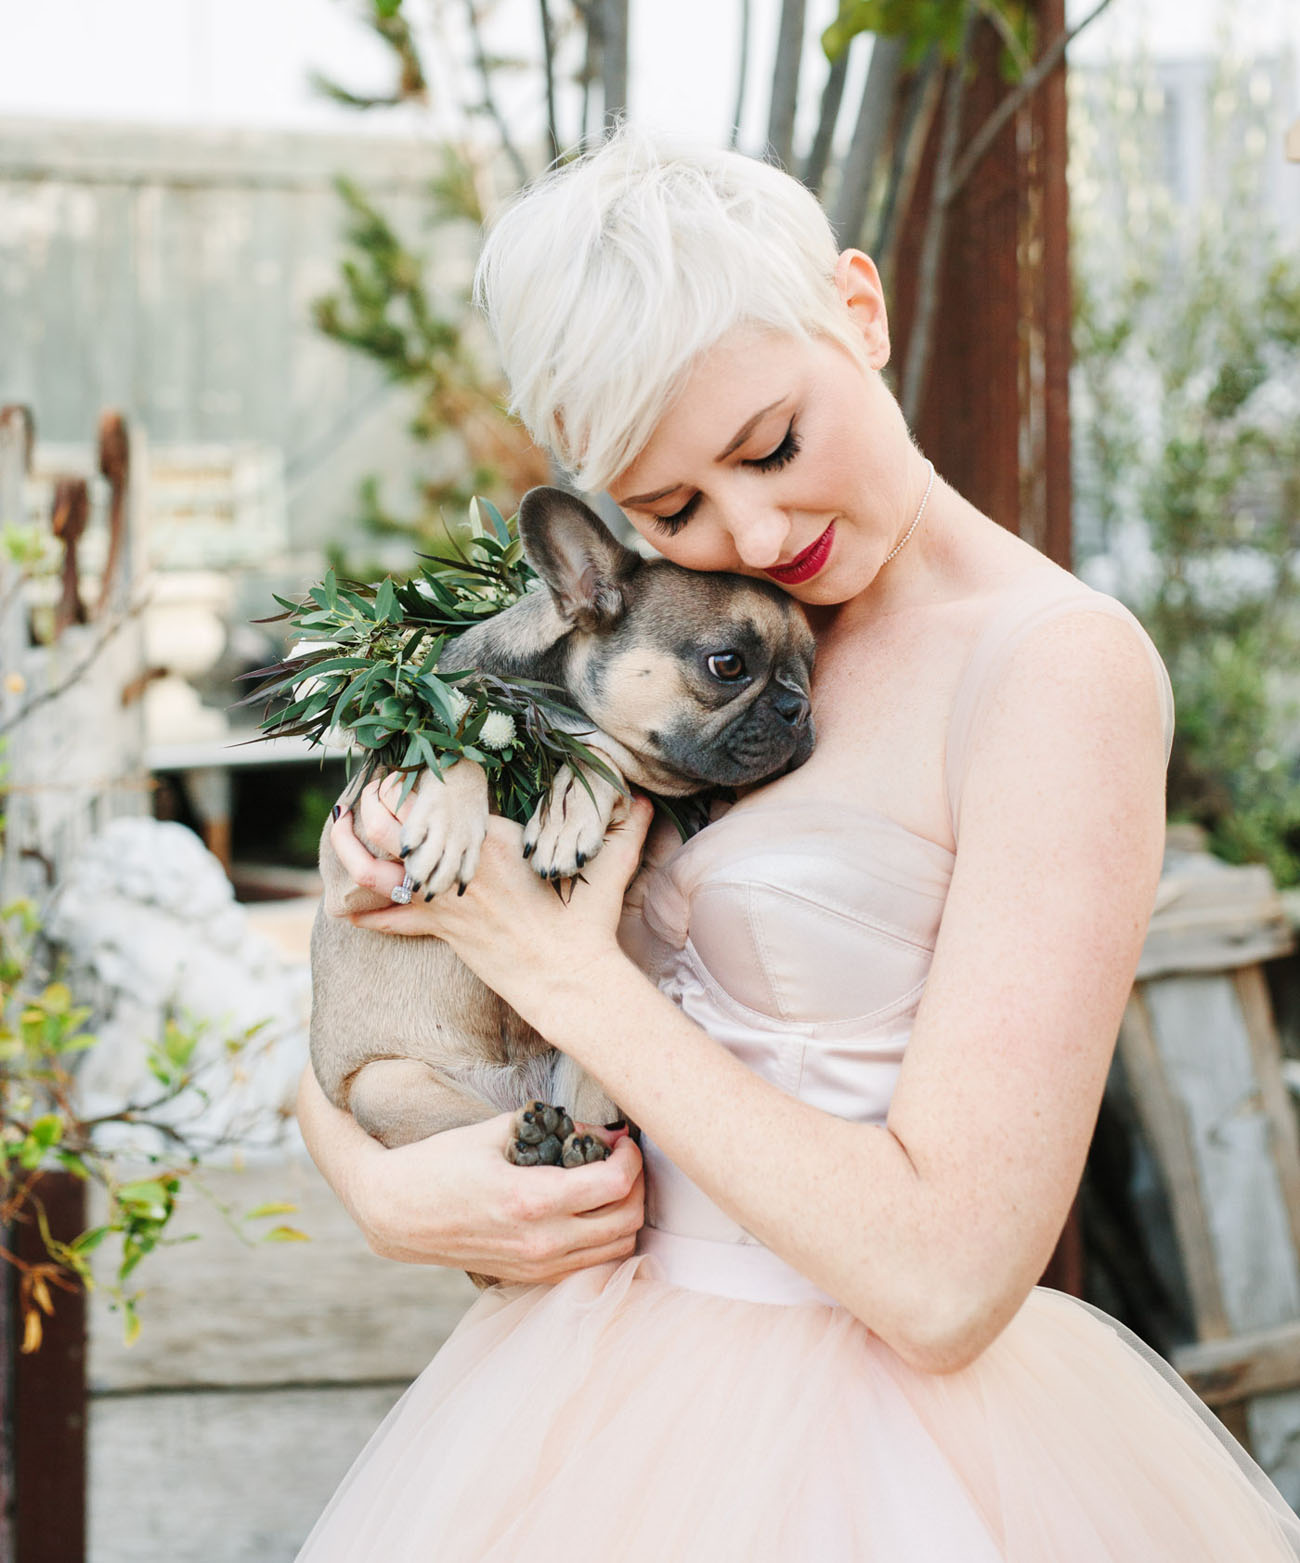 The couple pup Rilo became a flower girl at the wedding, such a great idea to incorporate your pet into your big day